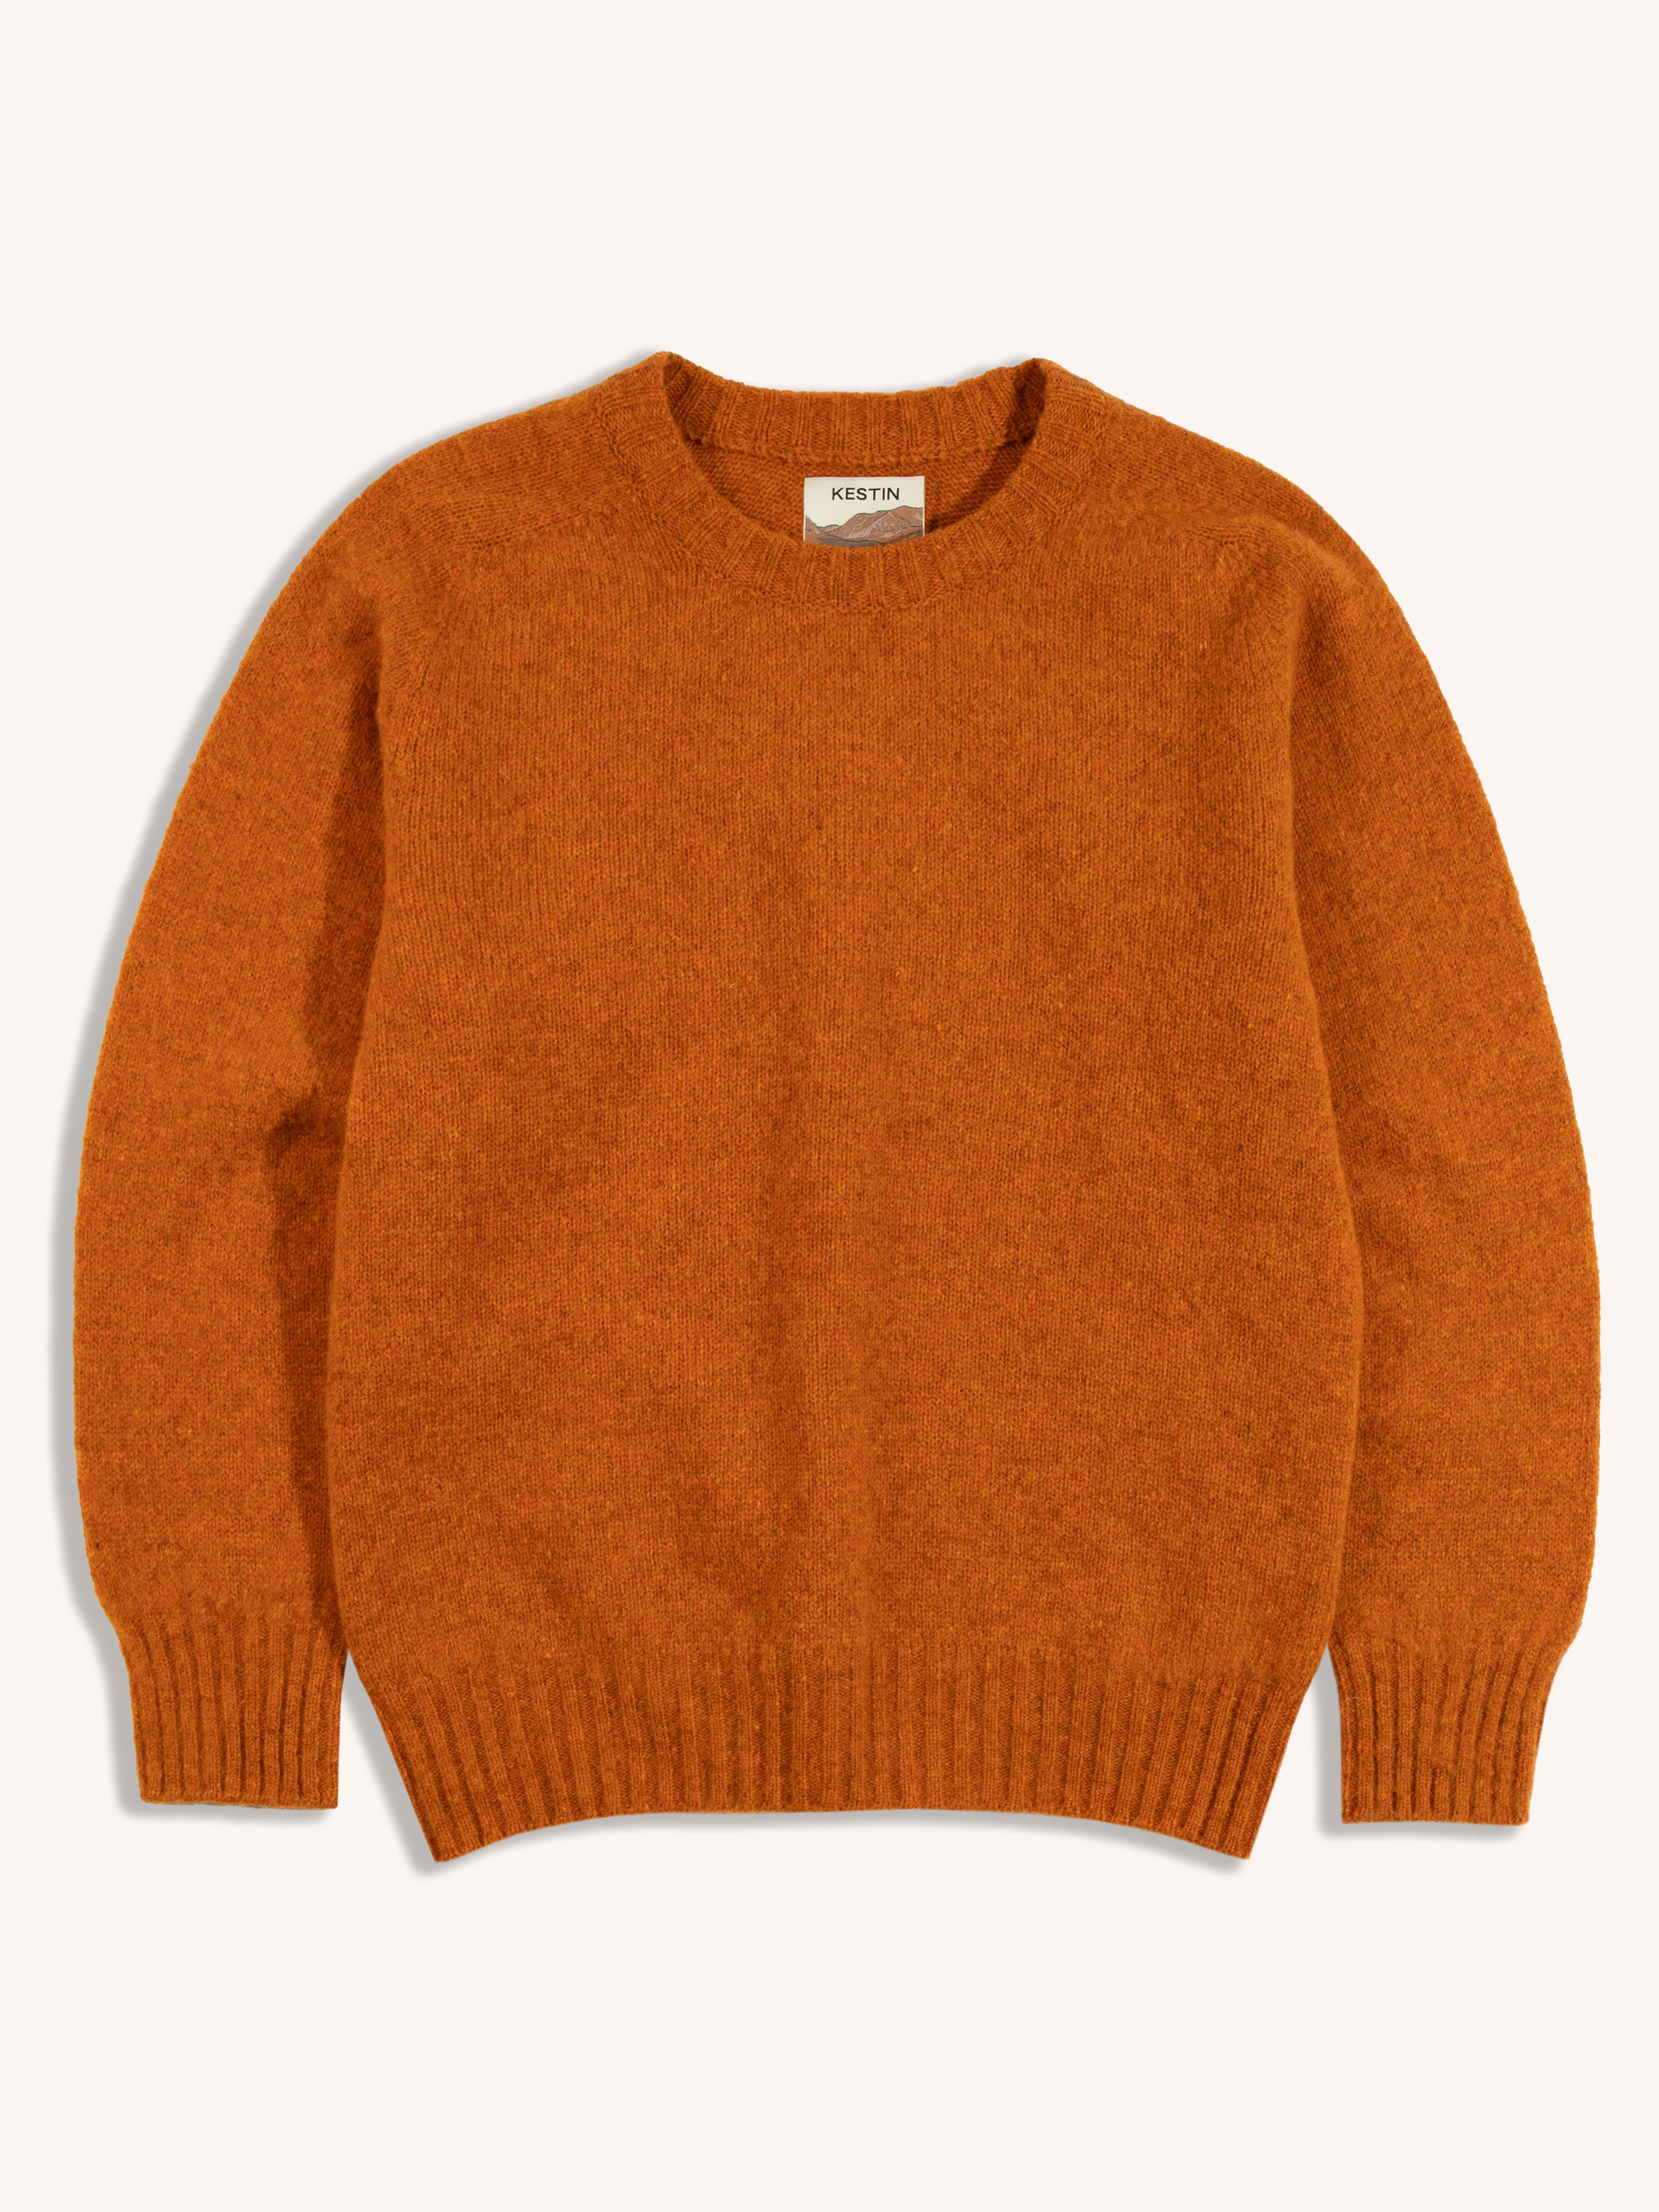 An orange sweater on a white background, made from a brushed Shetland wool.